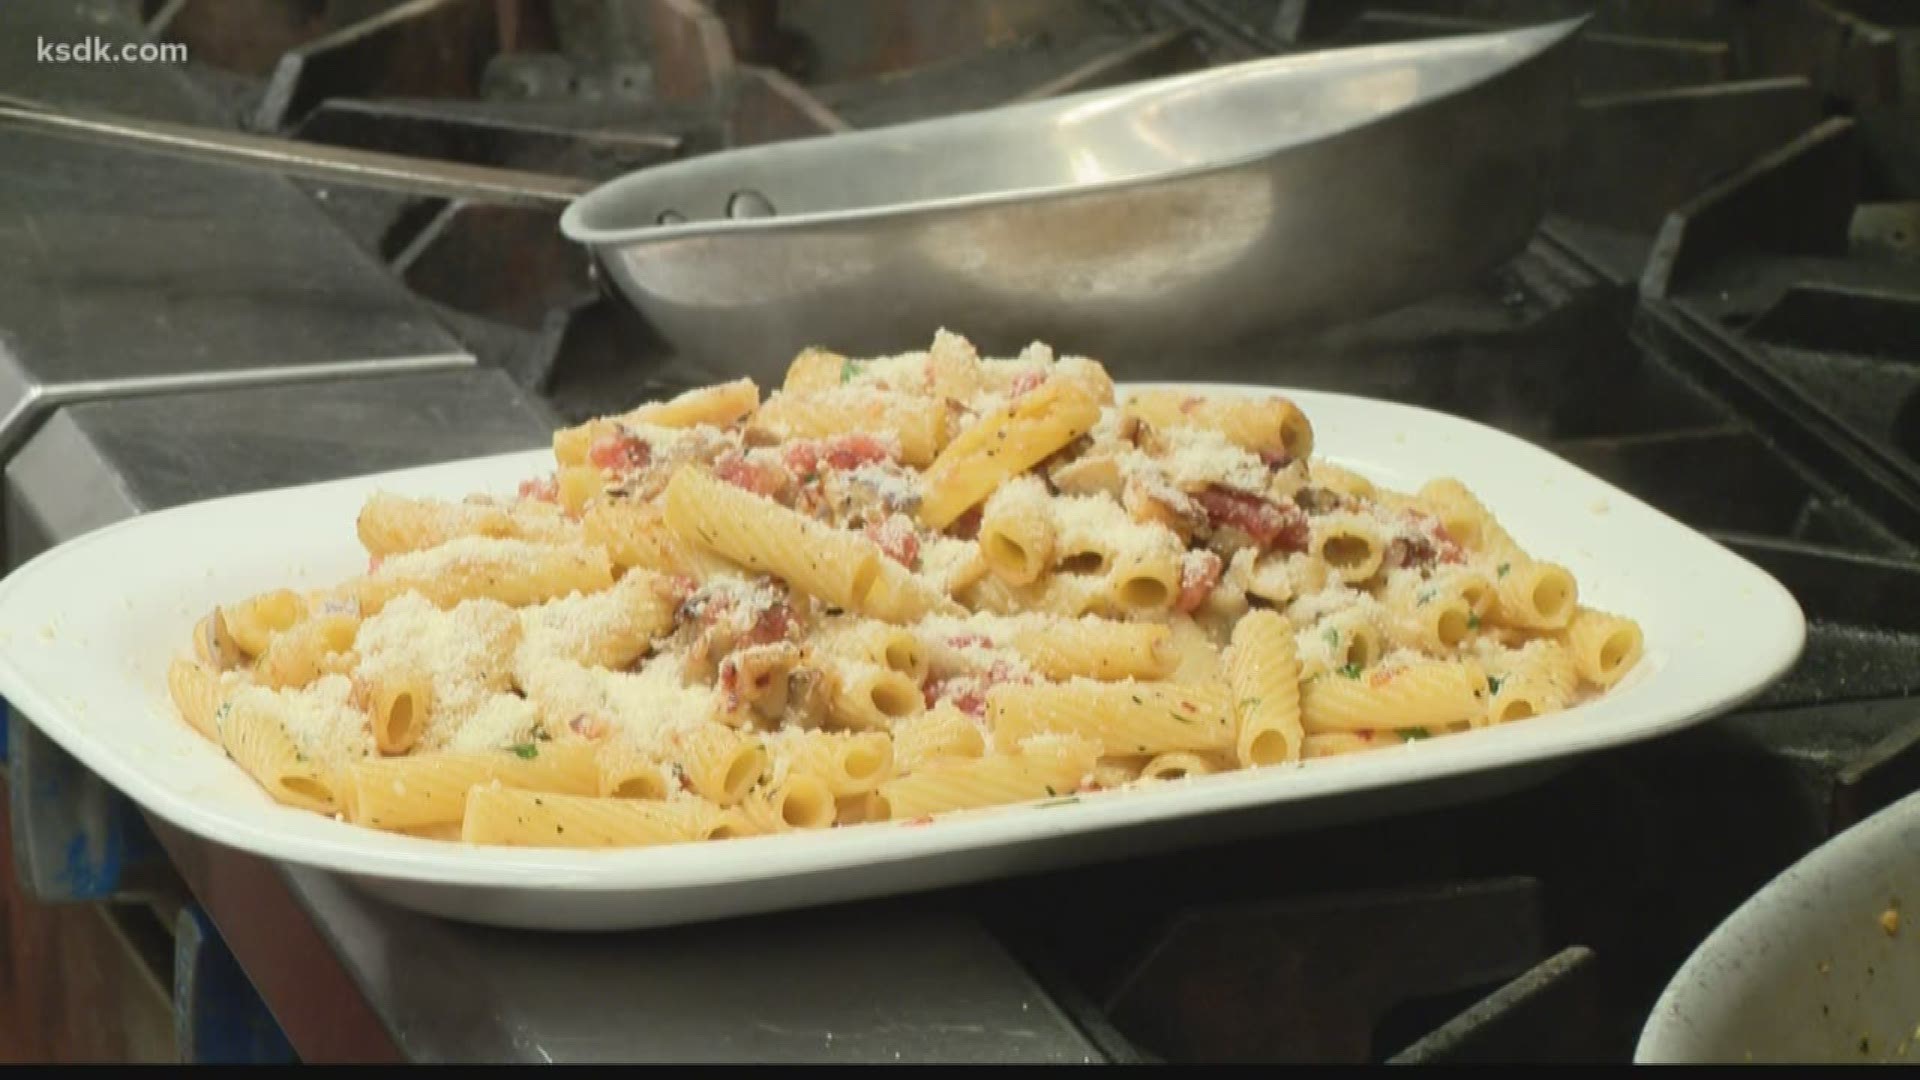 This week, Frank Cusumano stopped by Dominic’s for his food pick.